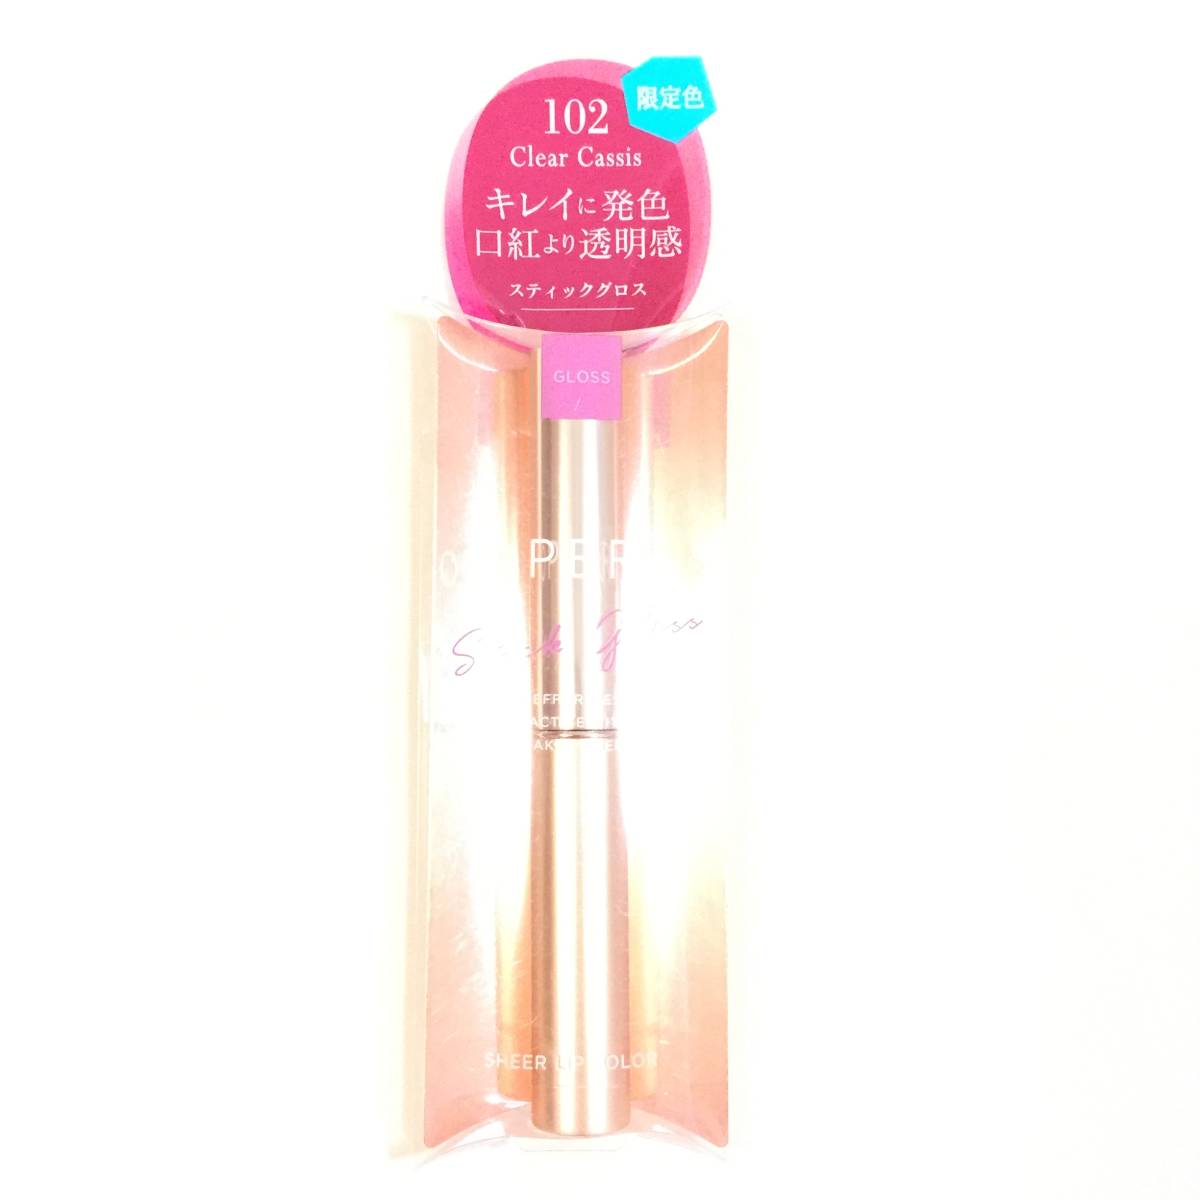 New Limited ◆ Opera (Opera) R Sheer Color Lip RN 102 CLEAR CASSI ◆ Глосс Гляп